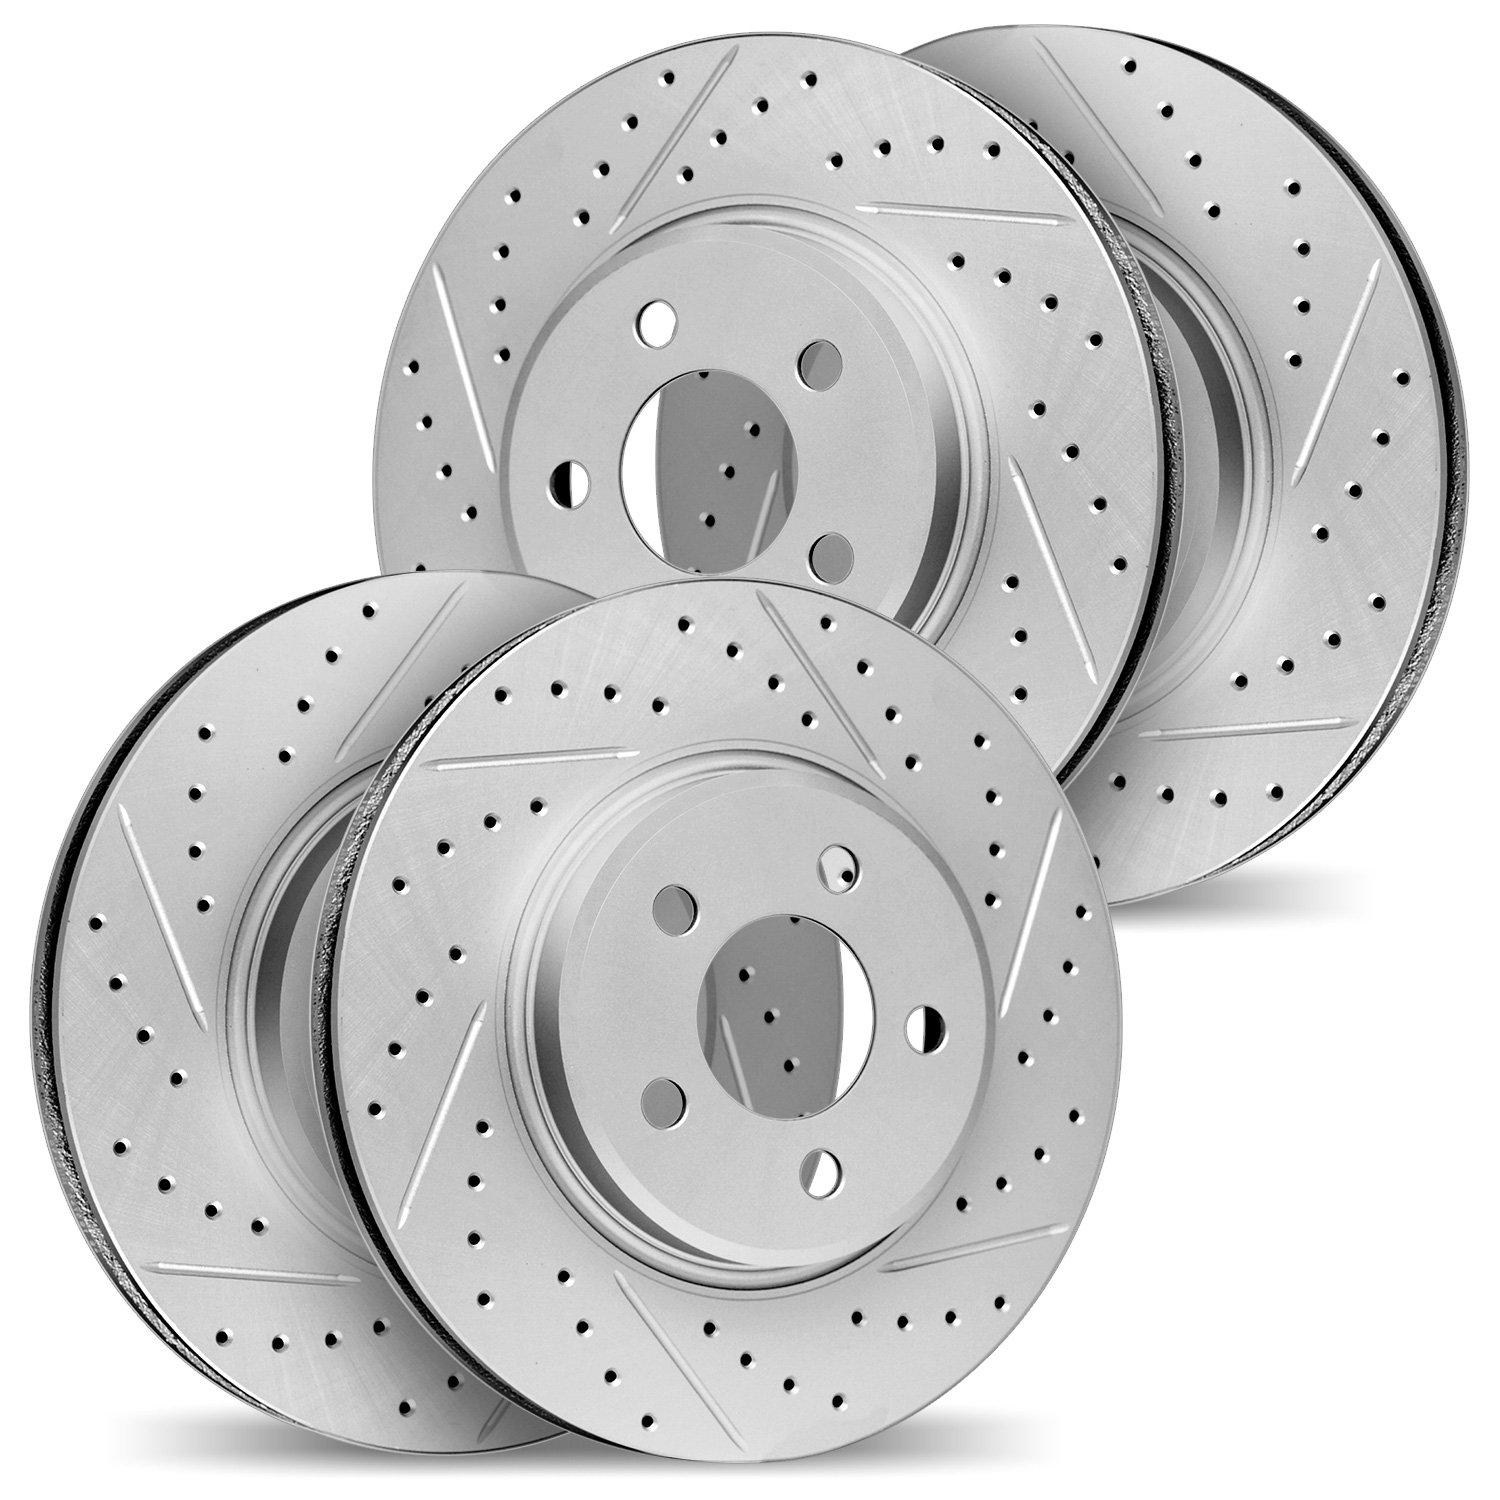 2004-40009 Geoperformance Drilled/Slotted Brake Rotors, 2002-2018 Mopar, Position: Front and Rear